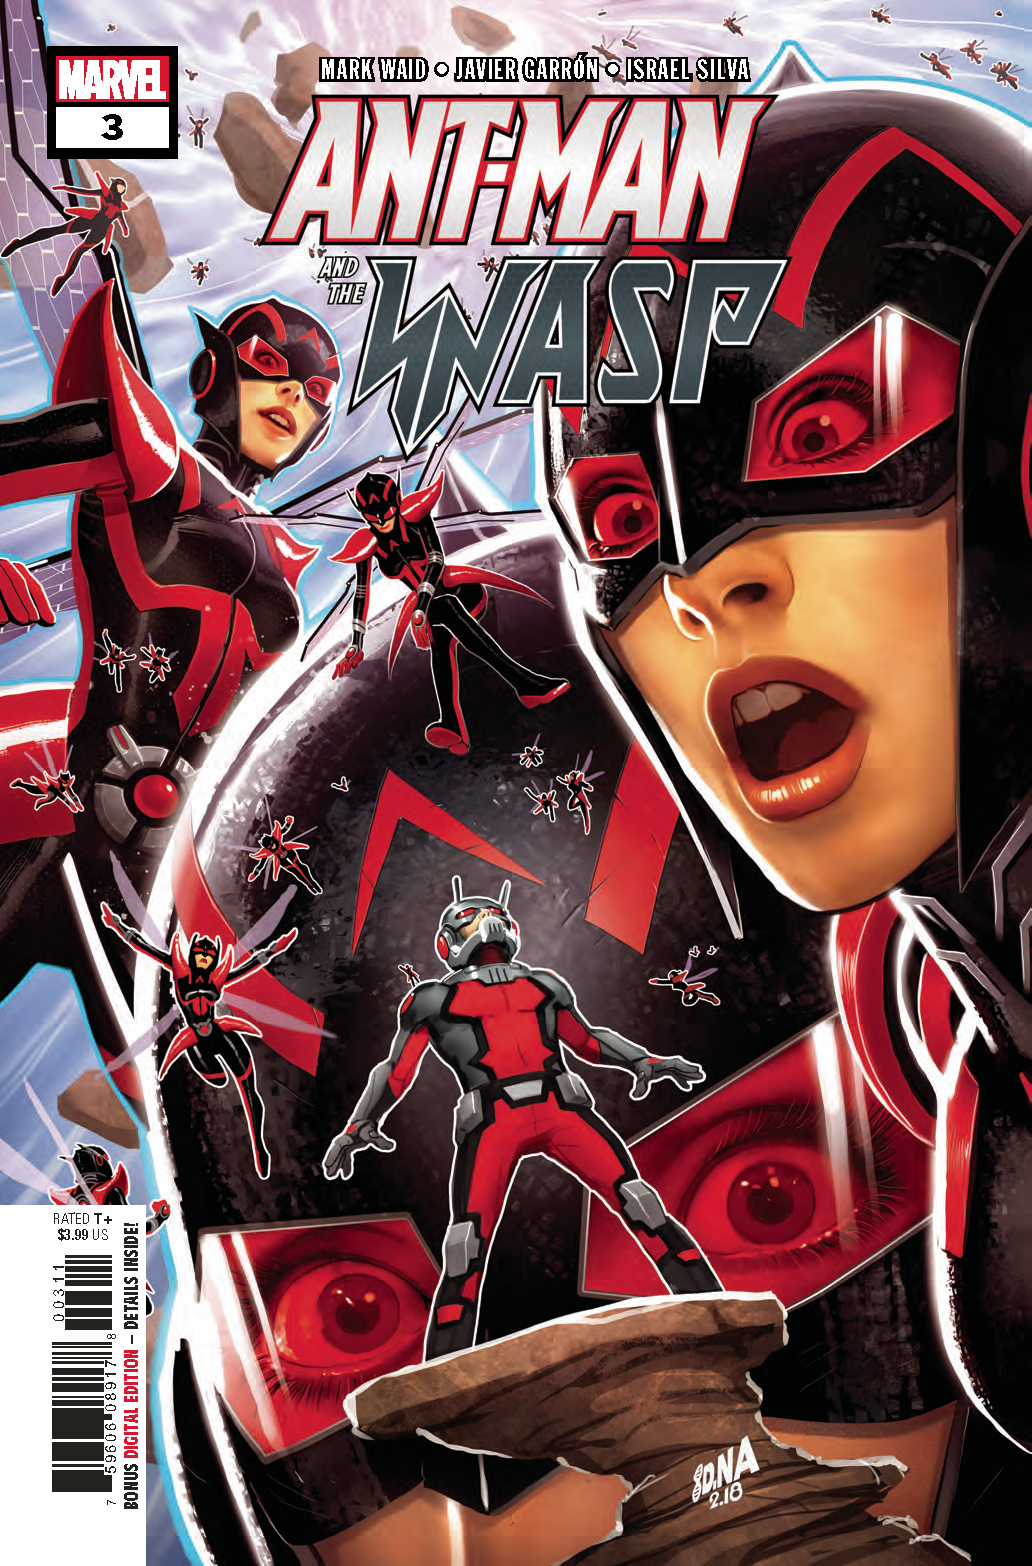 ANT-MAN AND THE WASP #3 (OF 5)